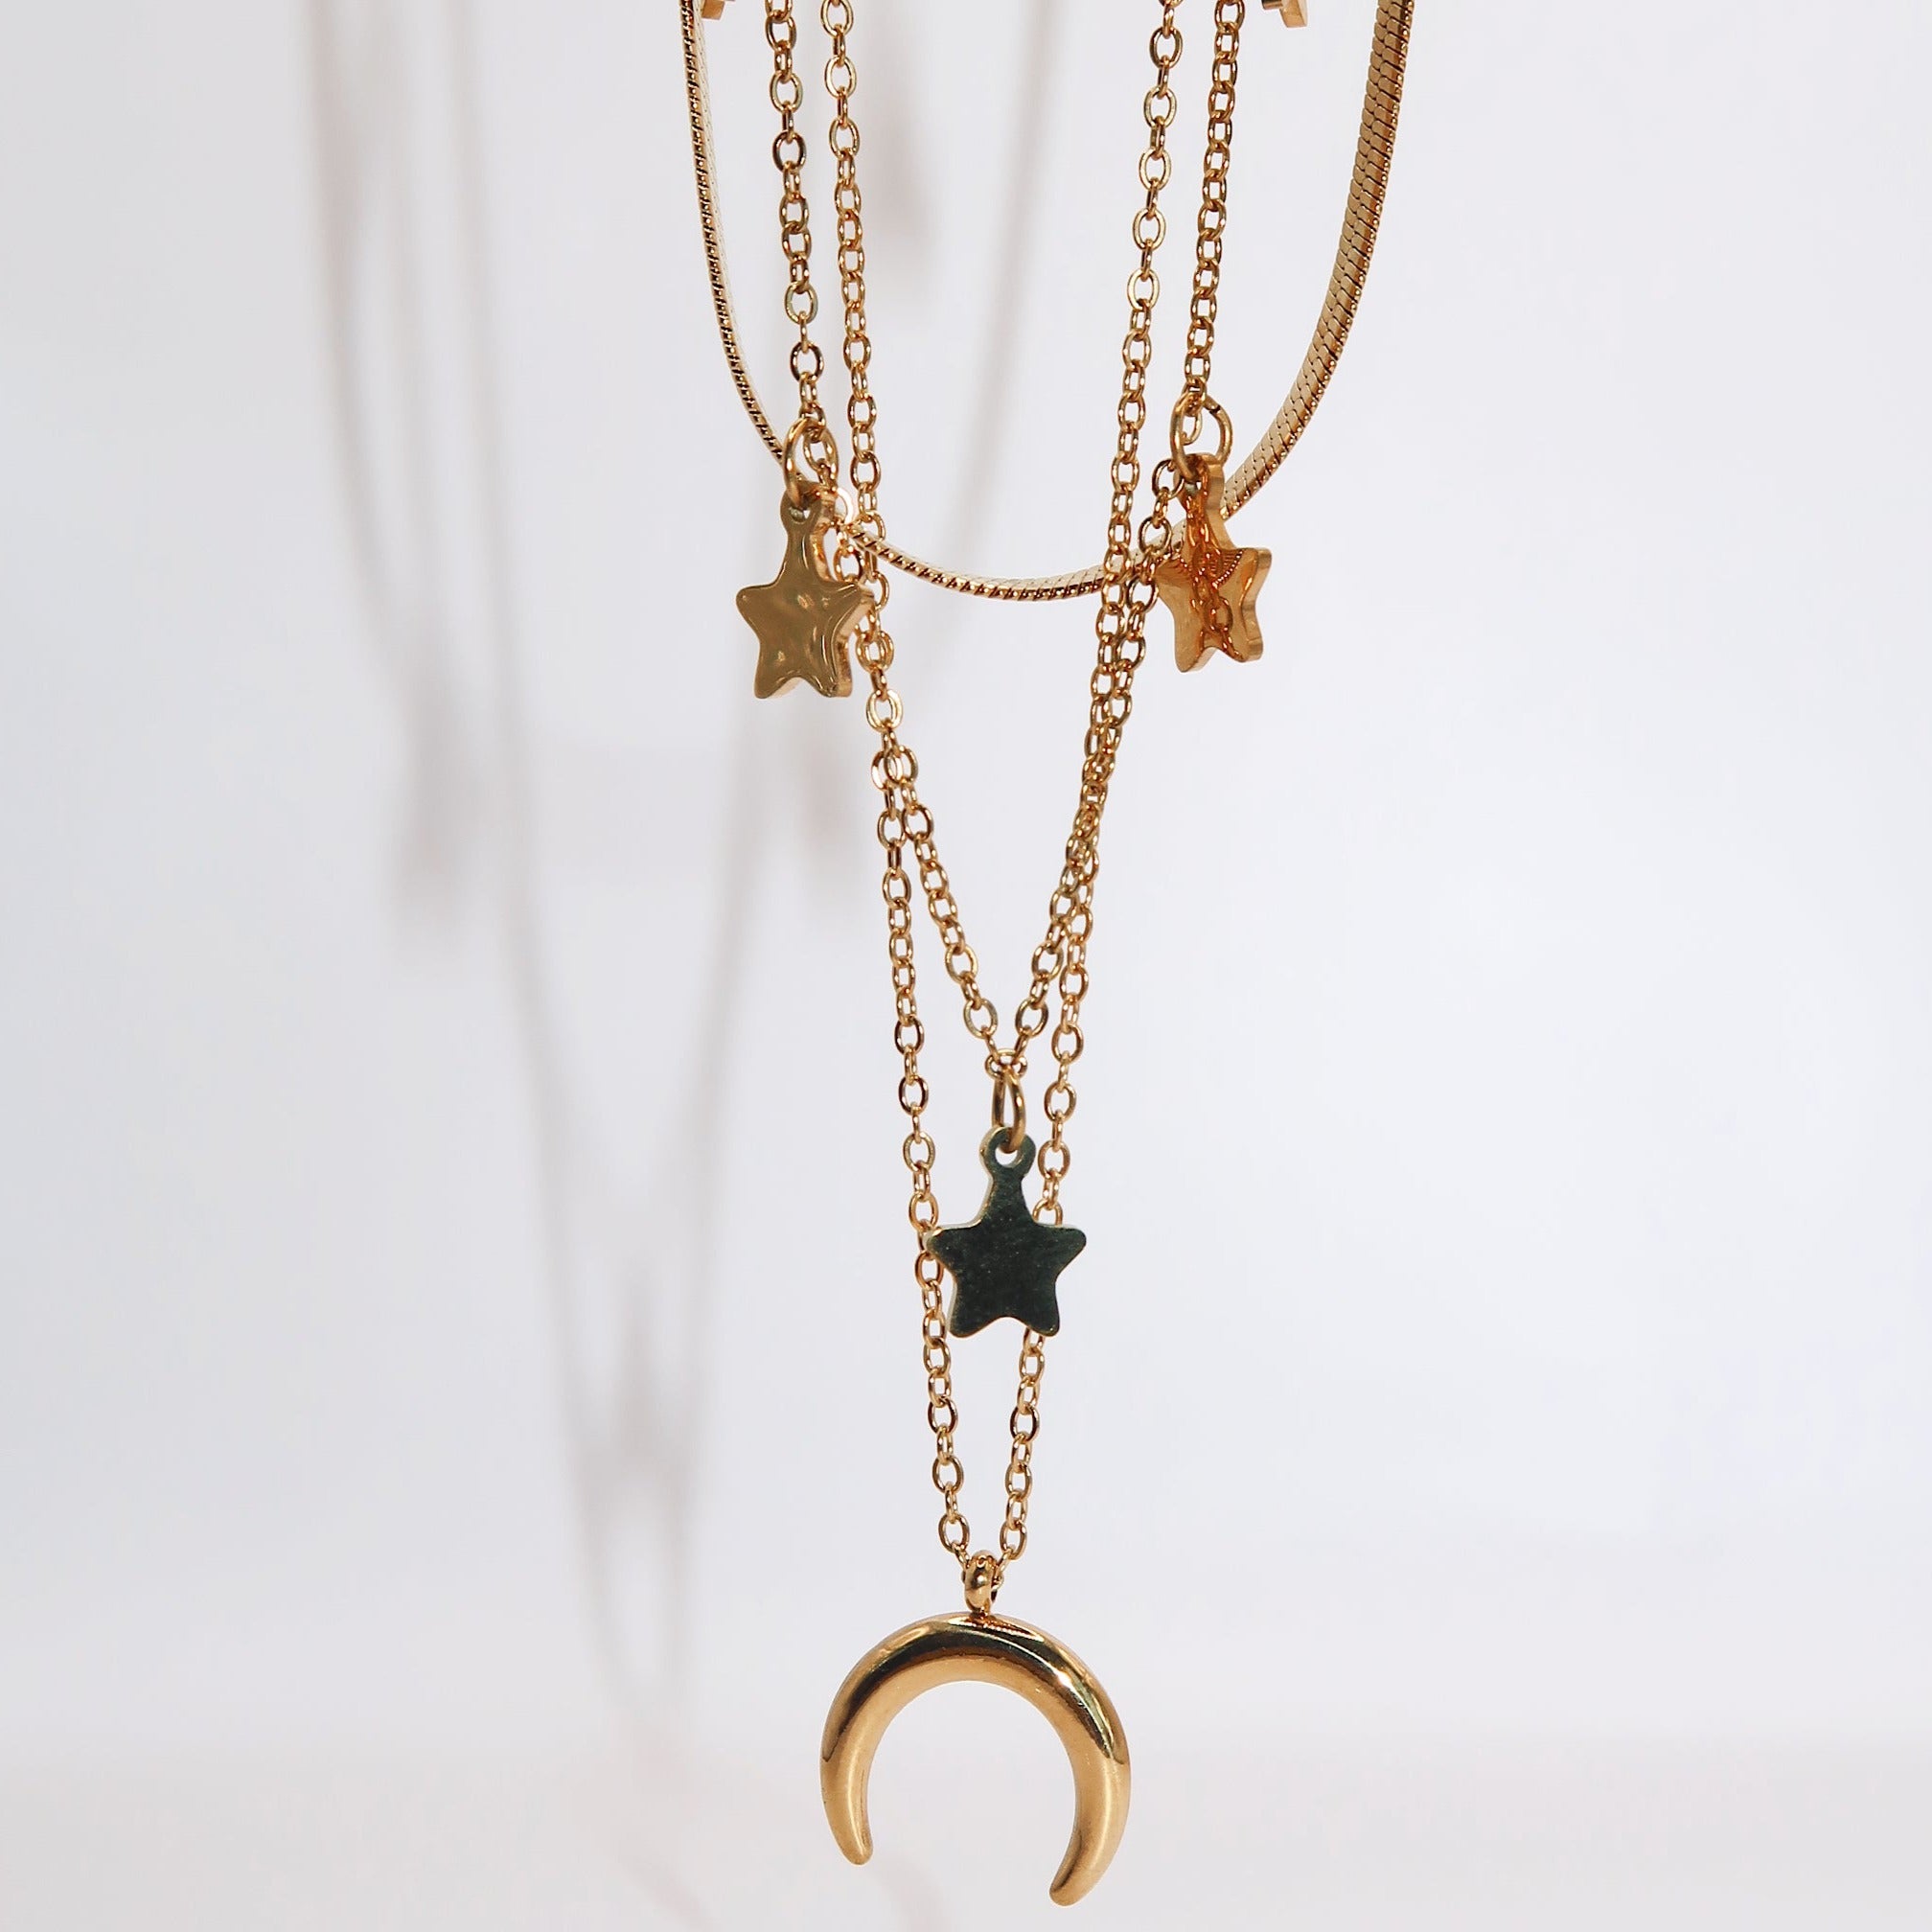 CELESTE - 18K Gold Star and Moon Layered Necklace - Mixed Metals